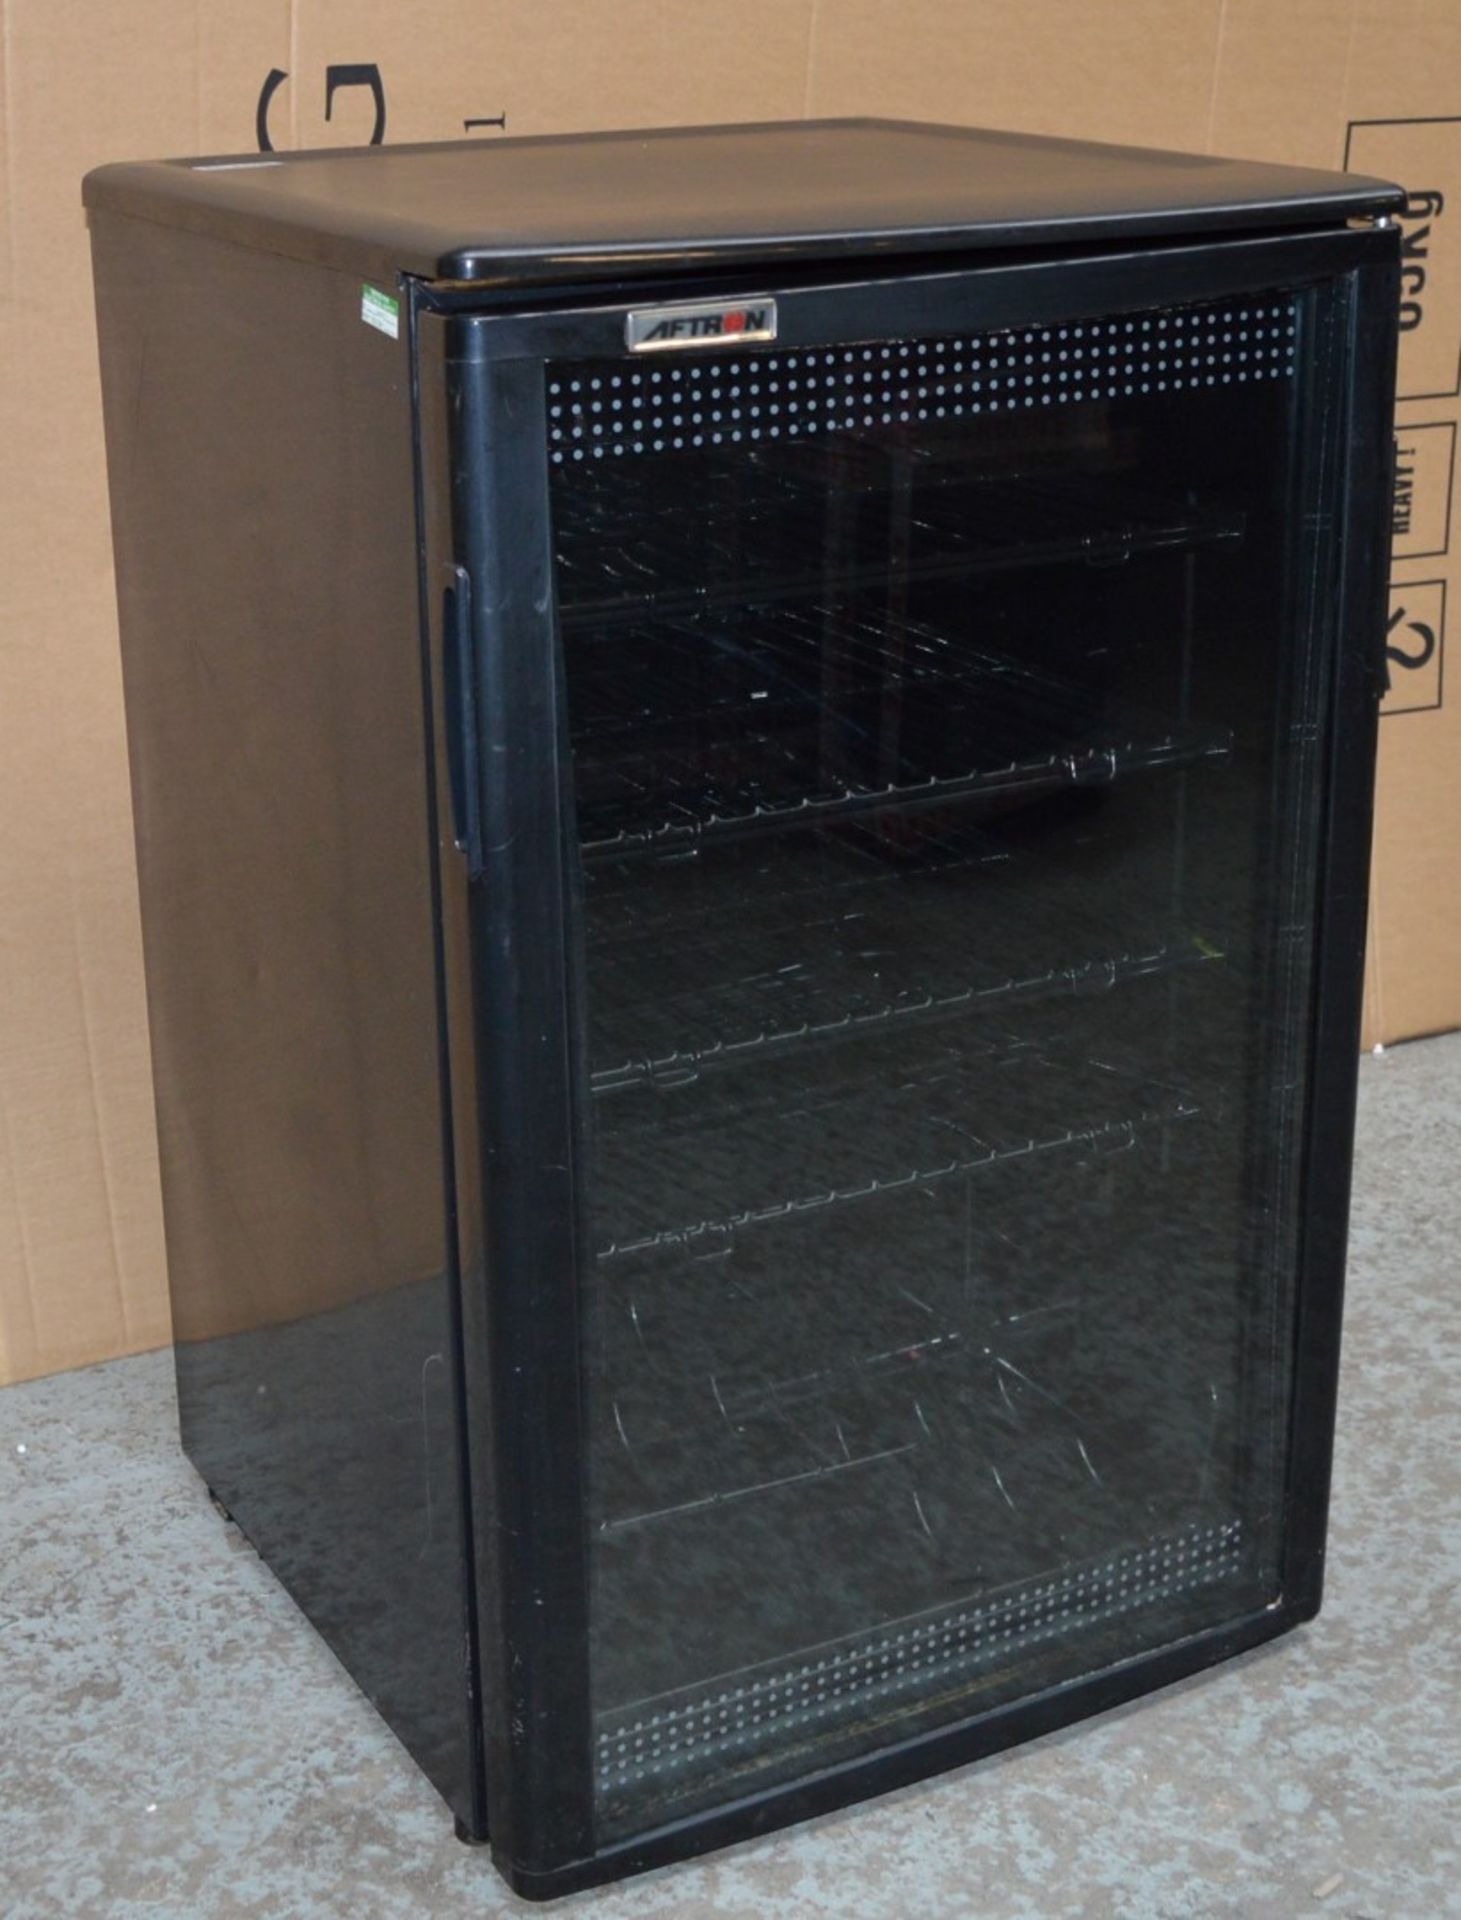 1 x Aftron Freestanding Wine Bottle Chiller - Model AFWK1330 - Ideal For Home Use or Commercial - Image 10 of 11